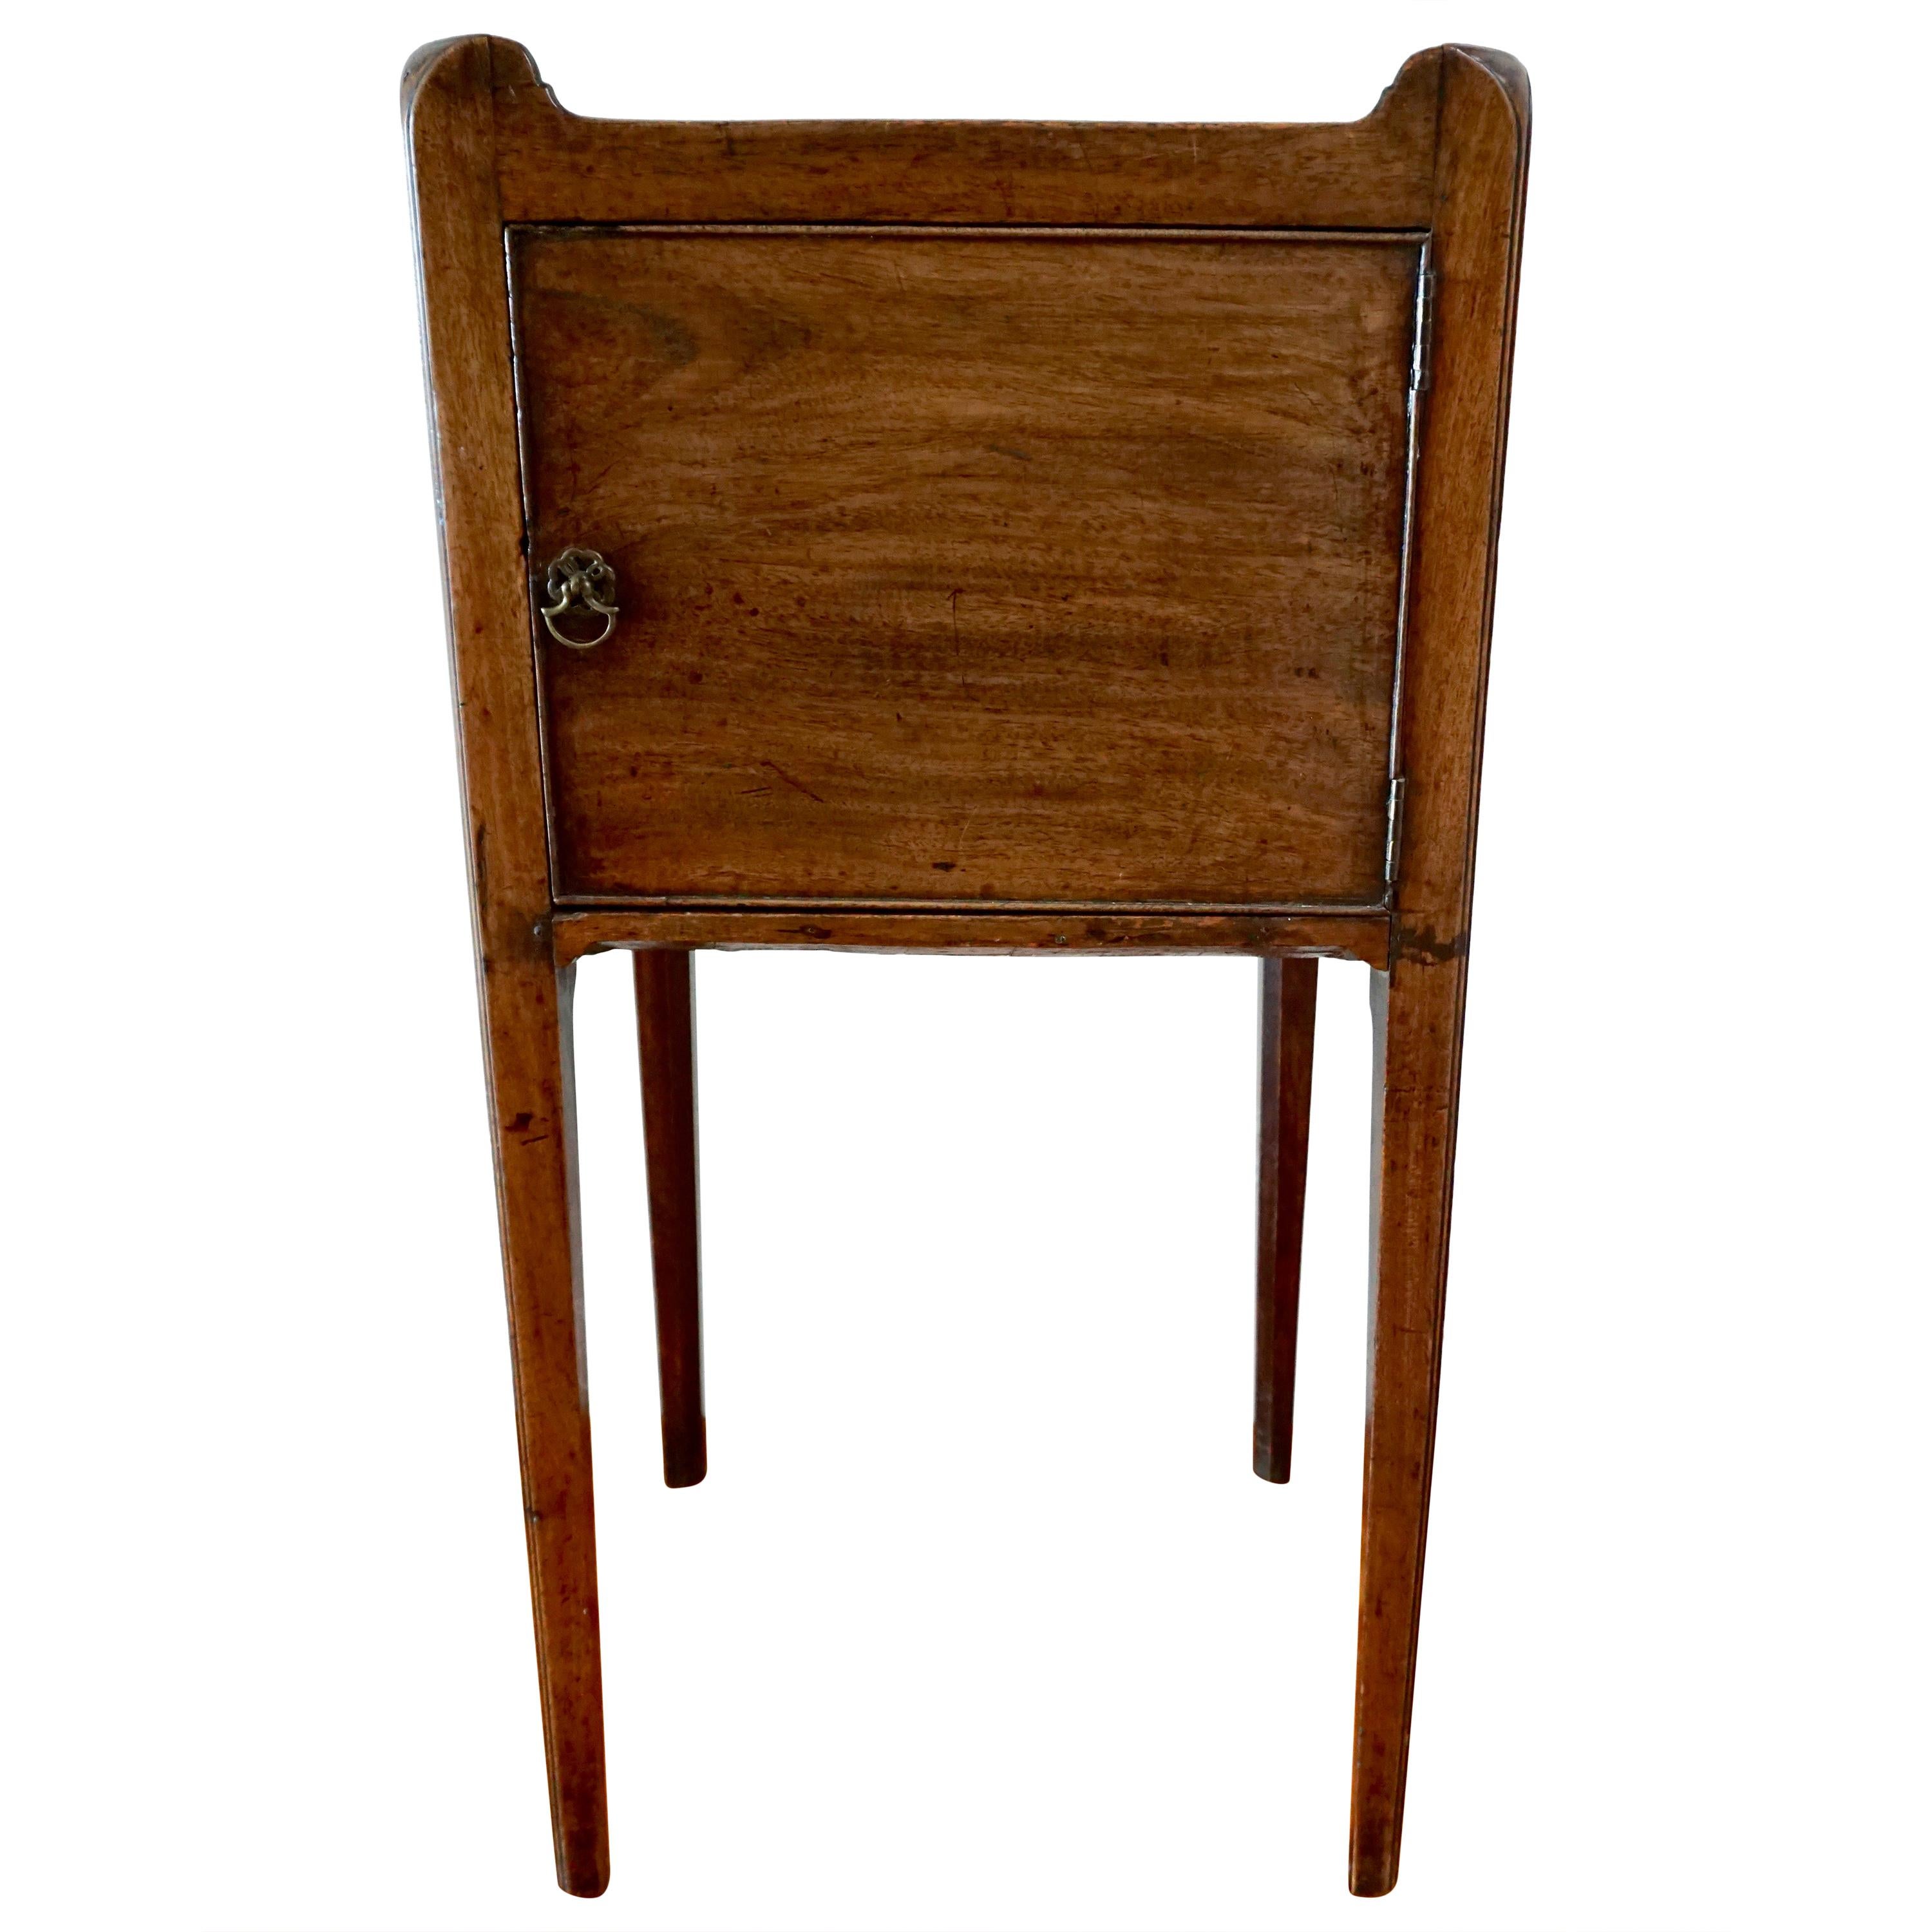 George III Mahogany Bedside Commode with Shaped Gallery Top